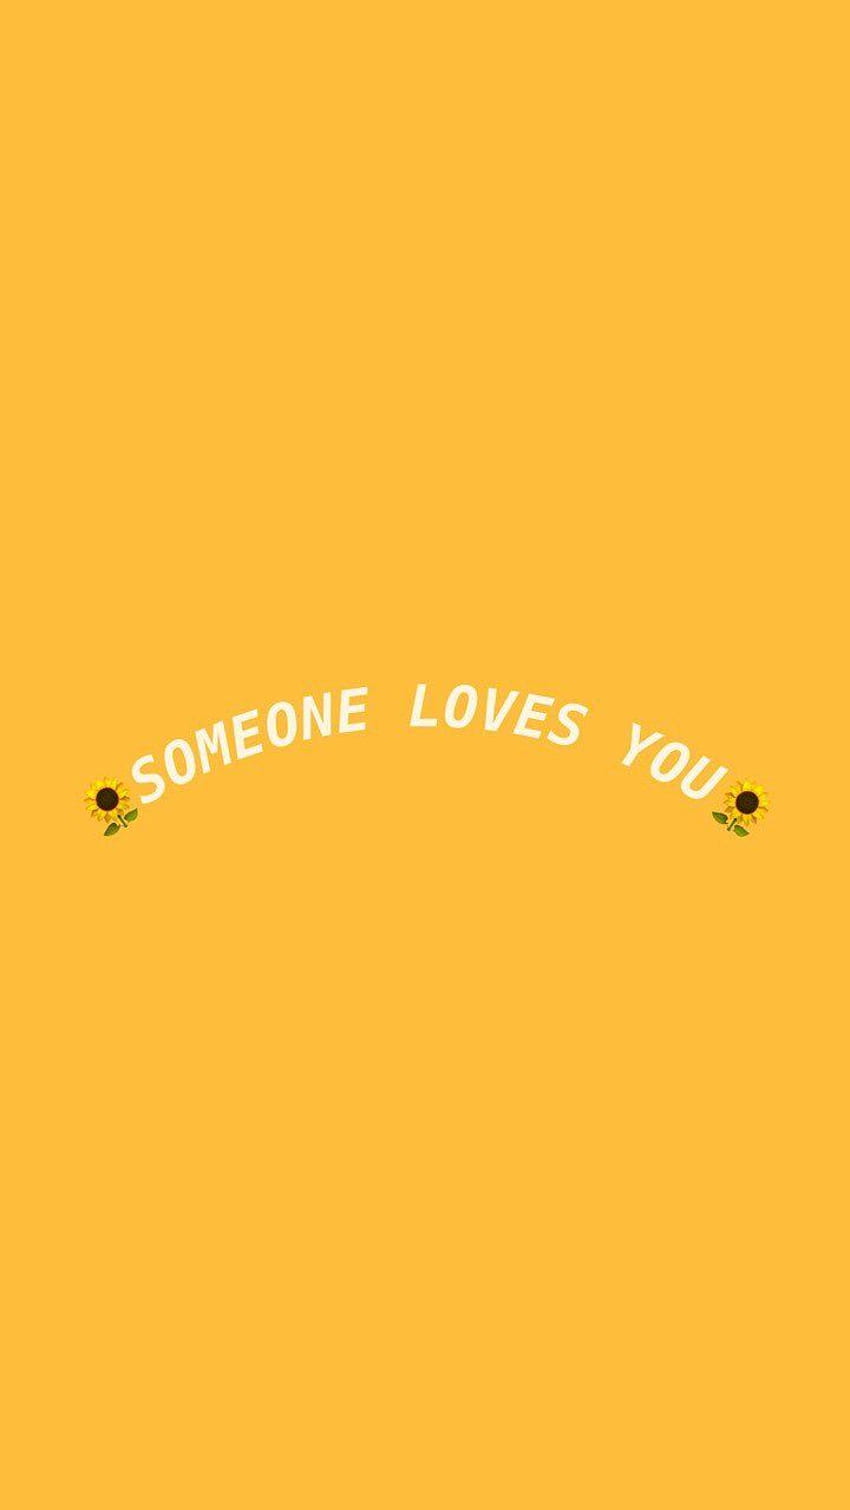 Someone loves you - Positivity